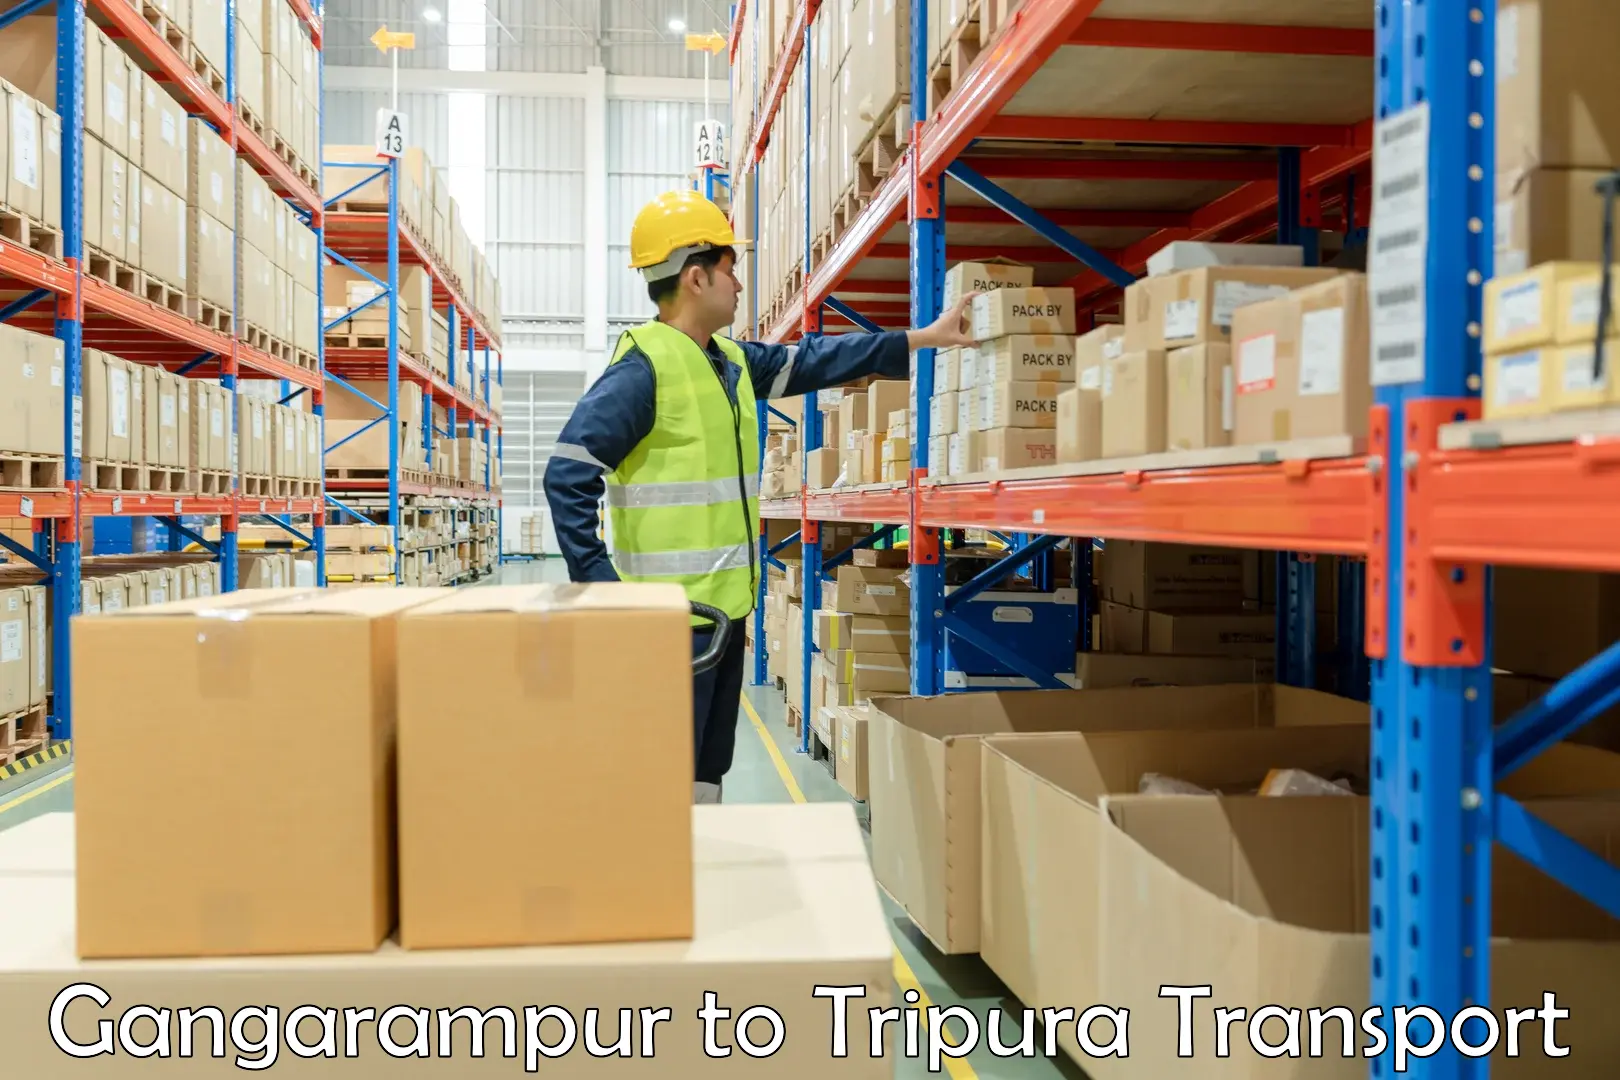 Delivery service Gangarampur to Amarpur